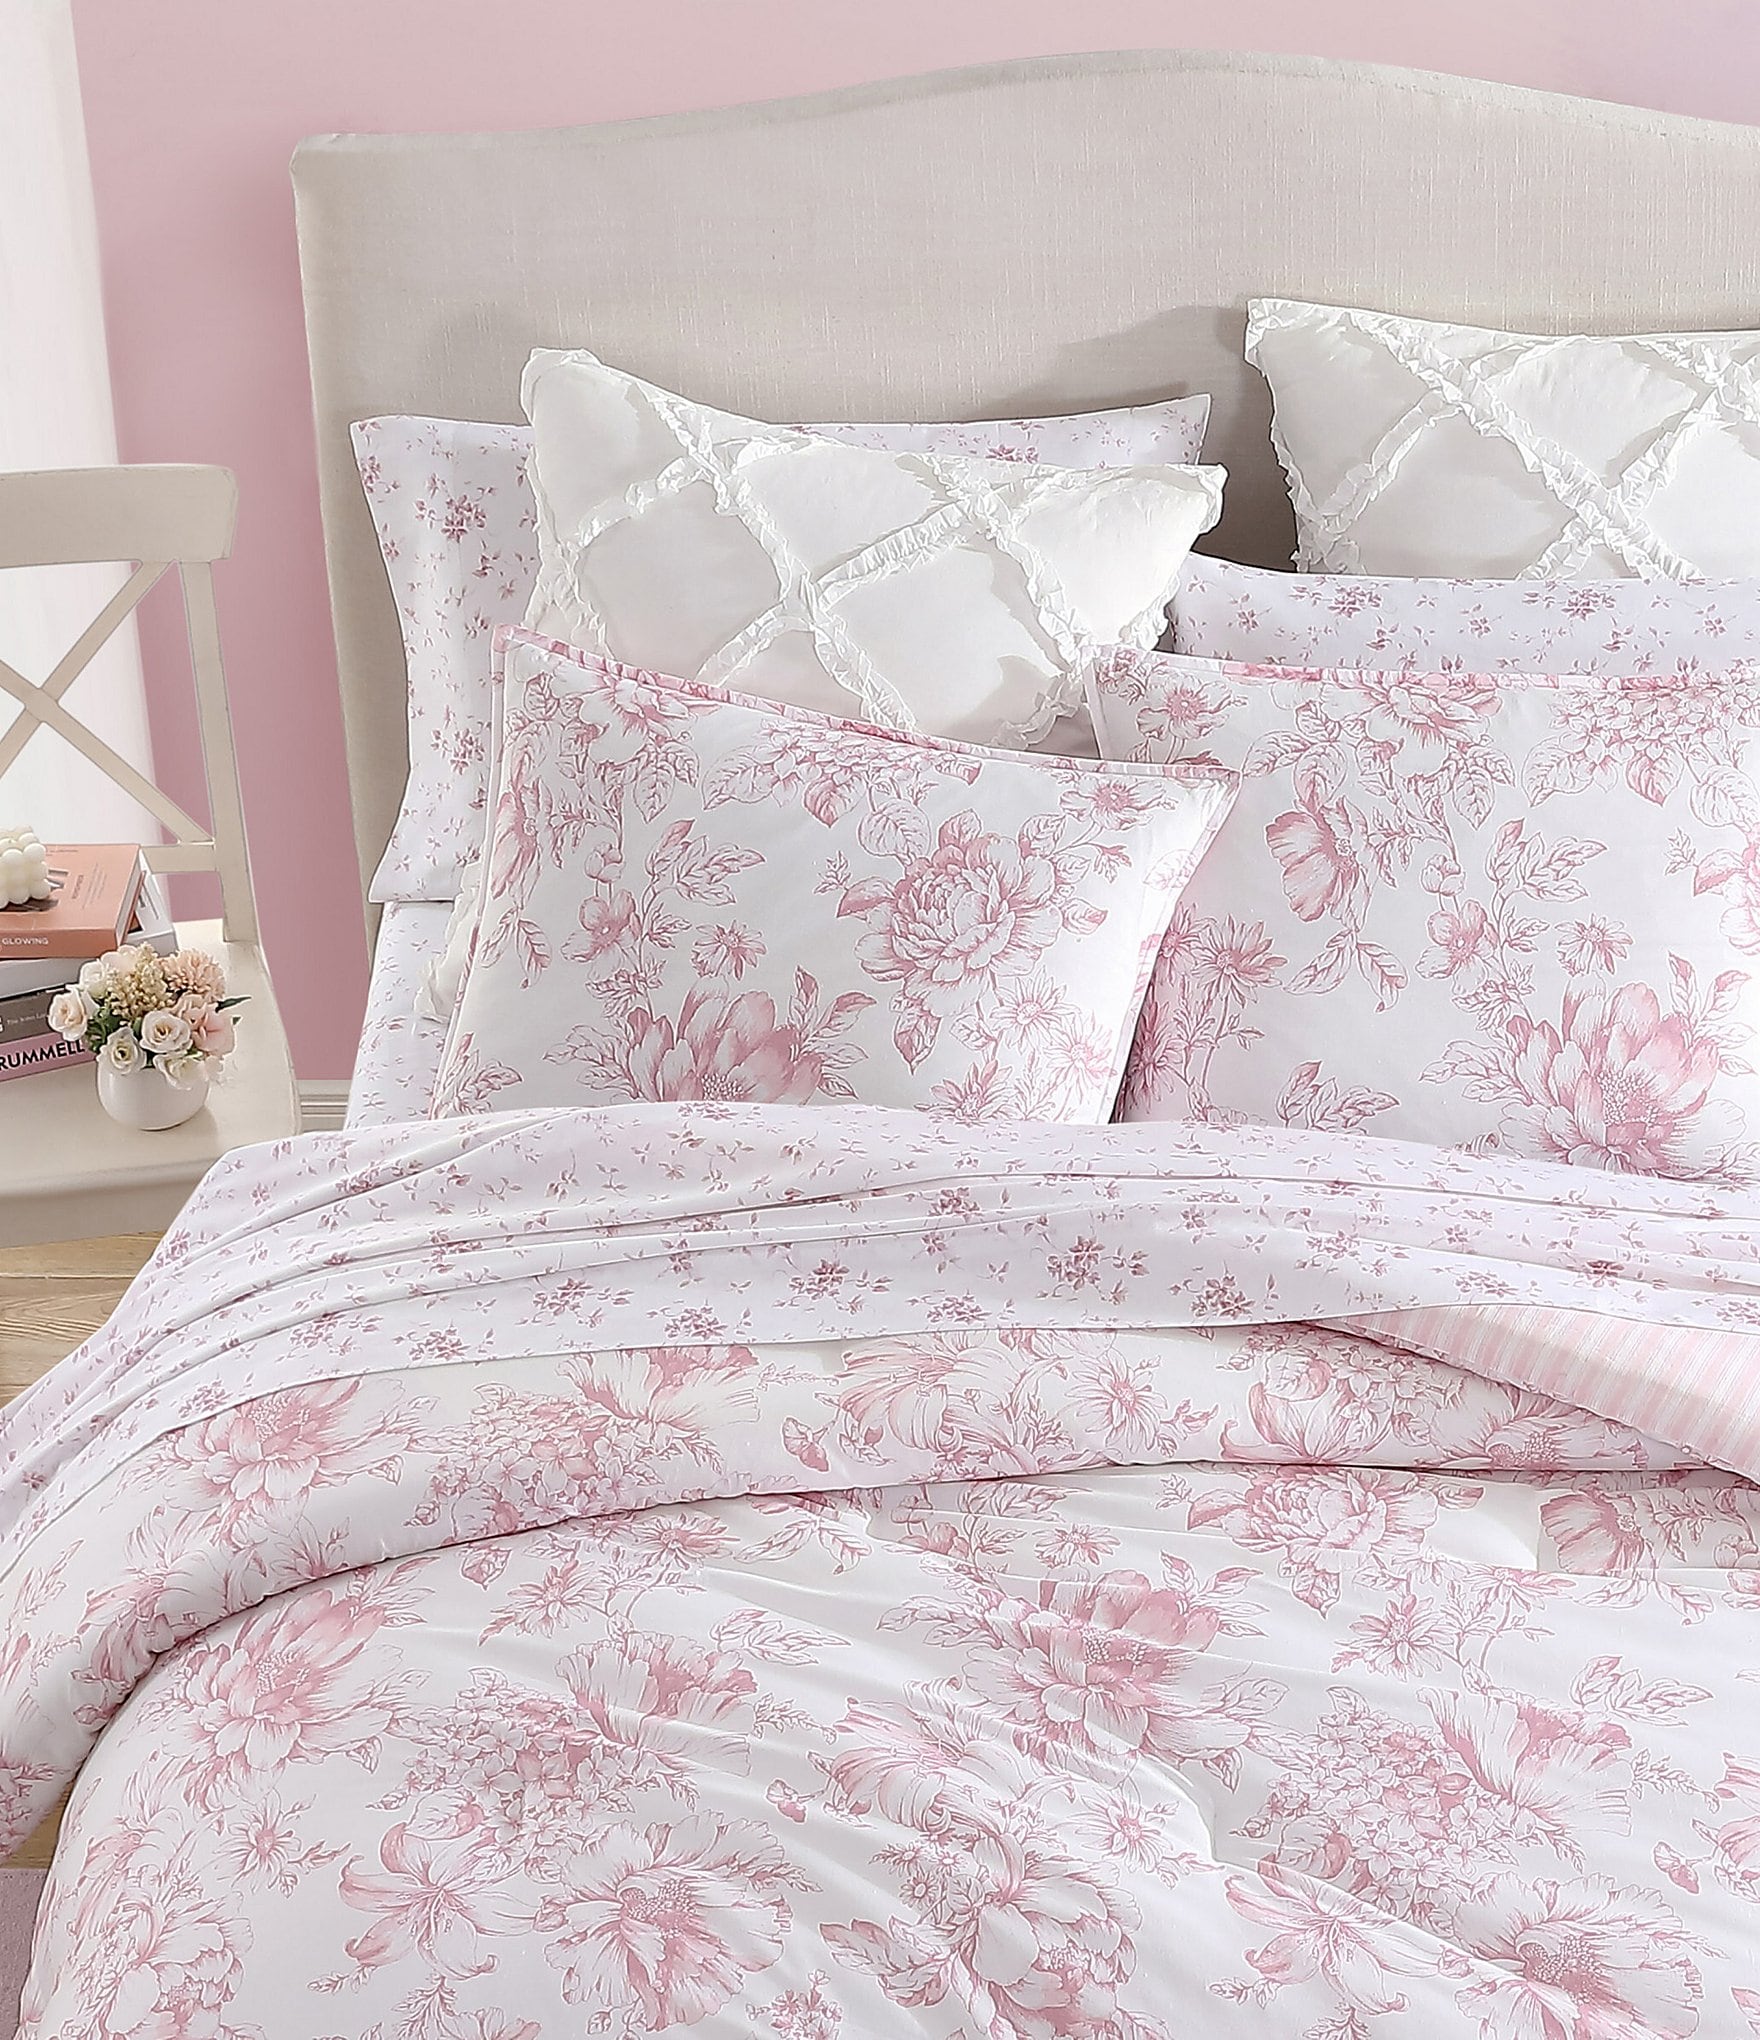 twin comforters: Bedding & Bedding Collections